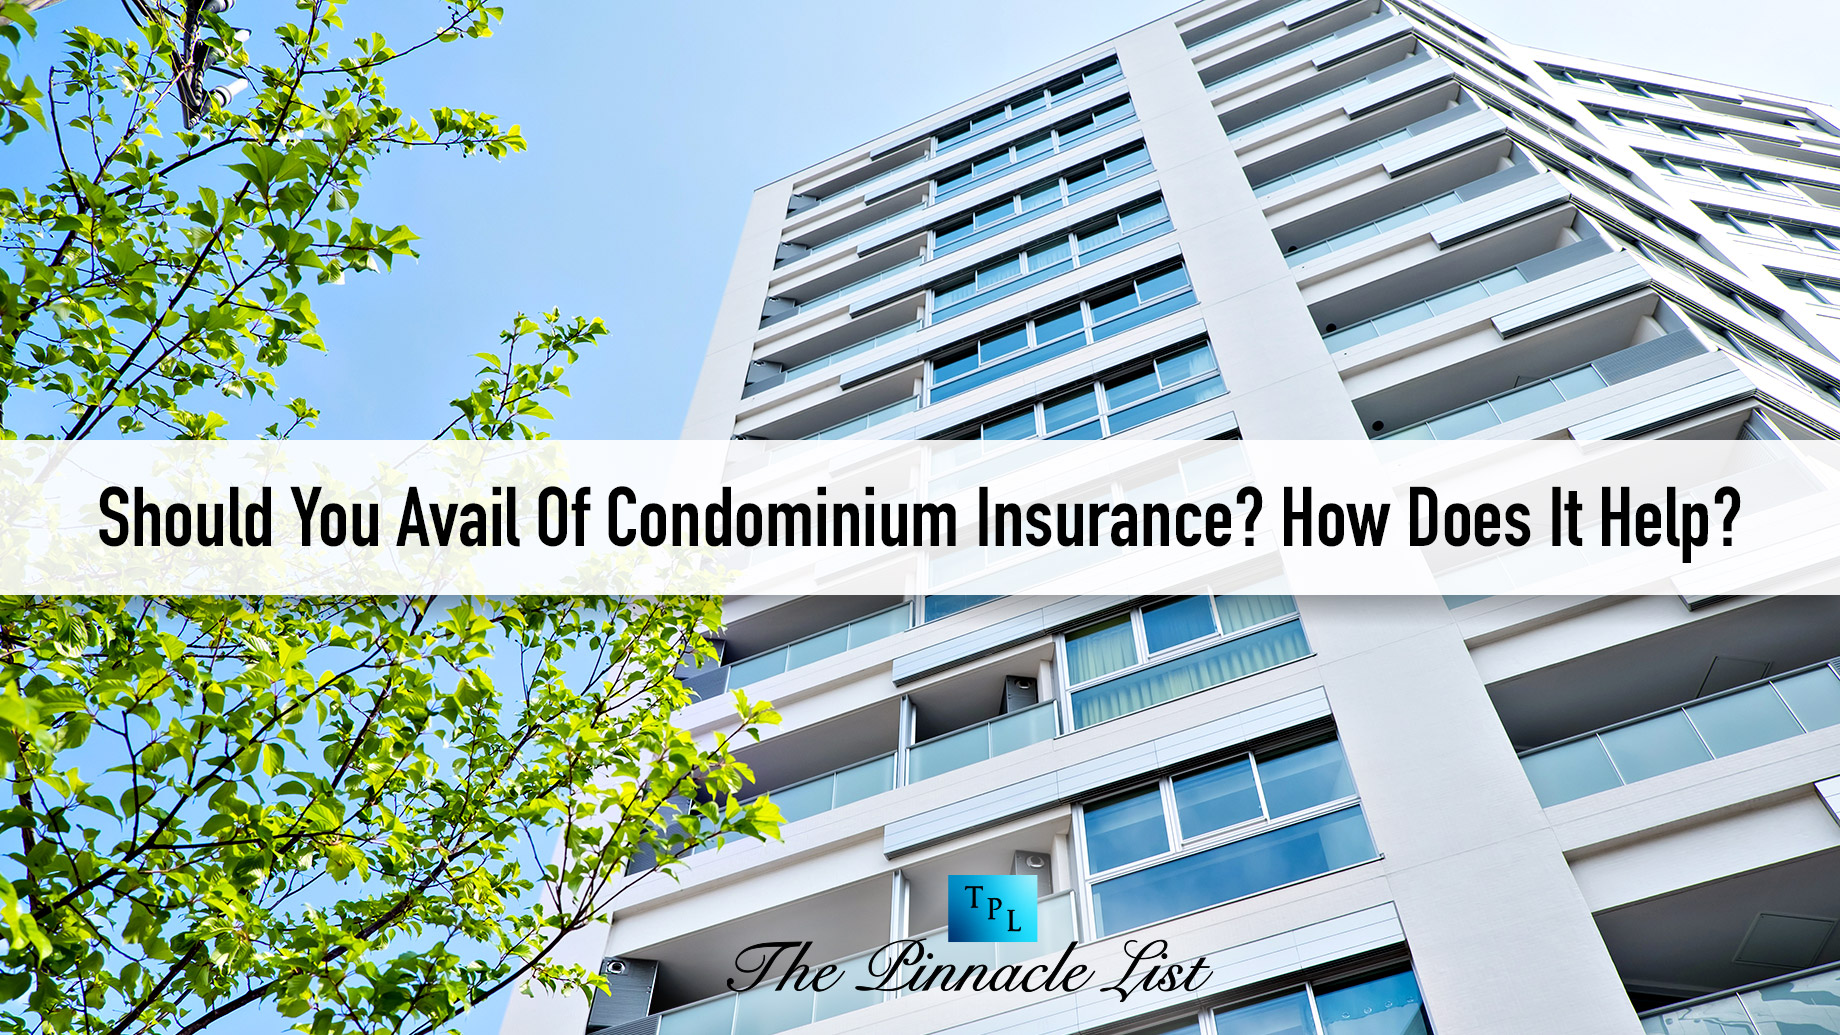 Should You Avail Of Condominium Insurance? How Does It Help?